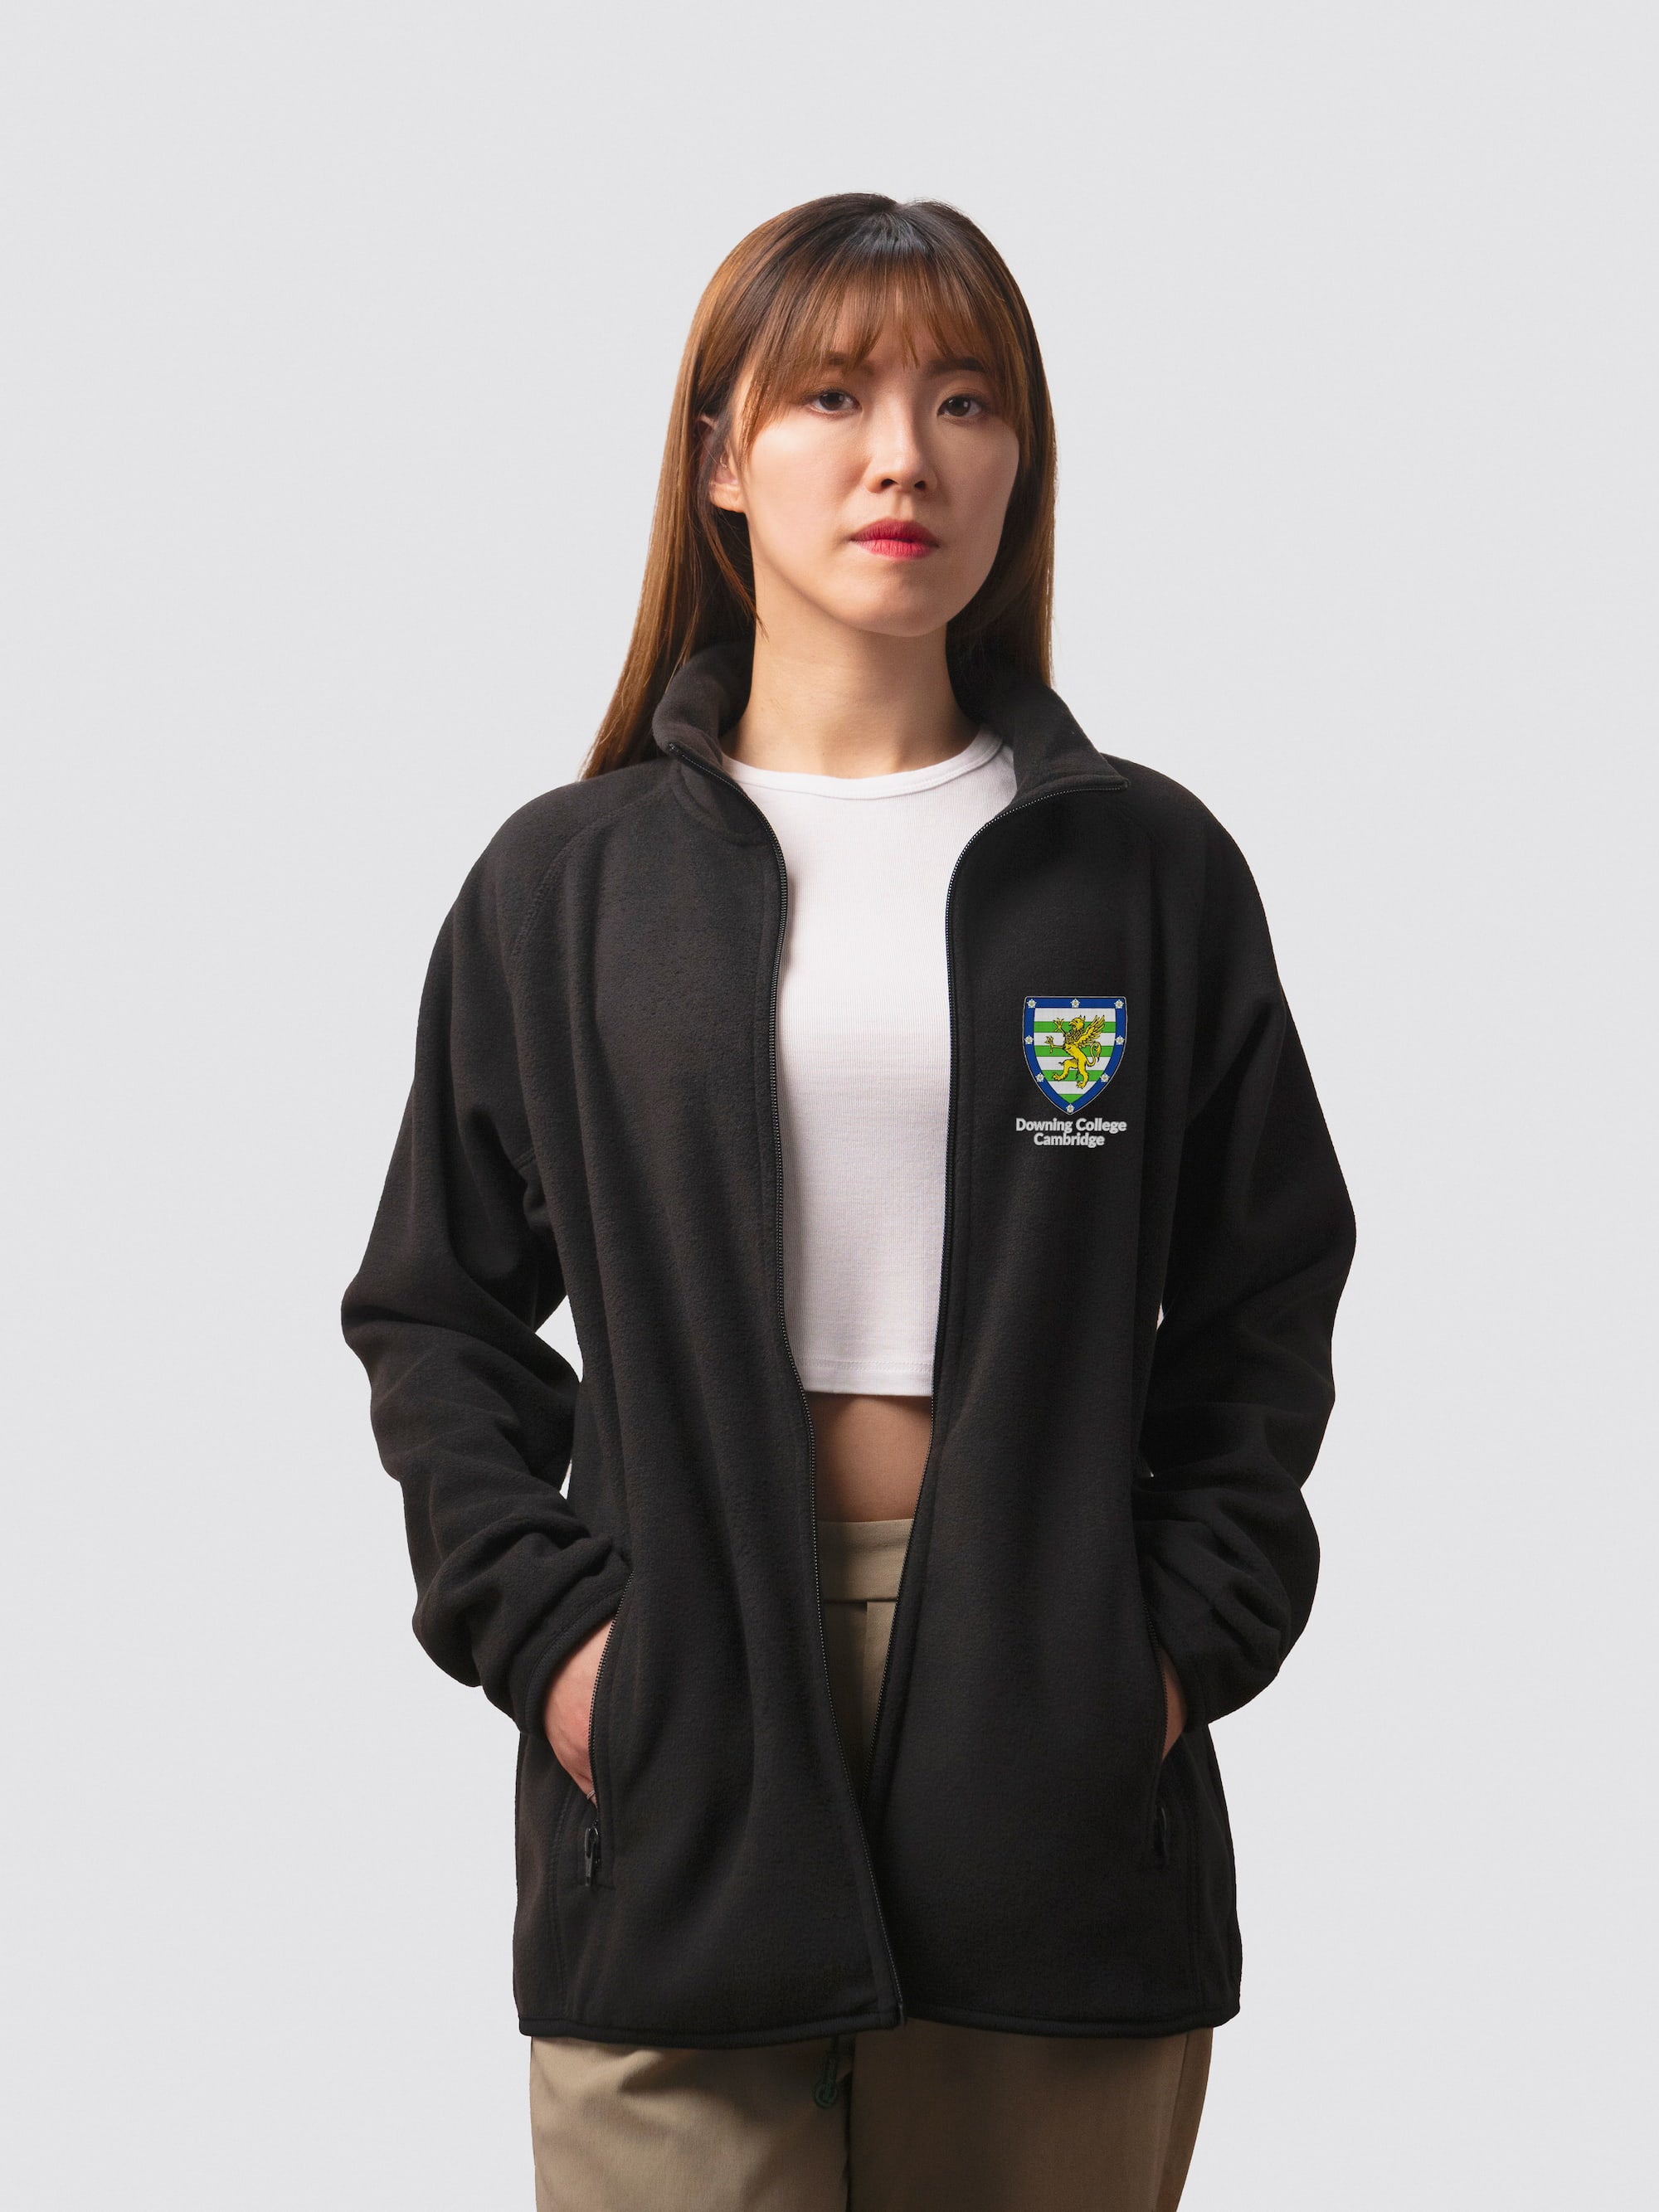 Custom student fleece, with Downing crest on the left chest